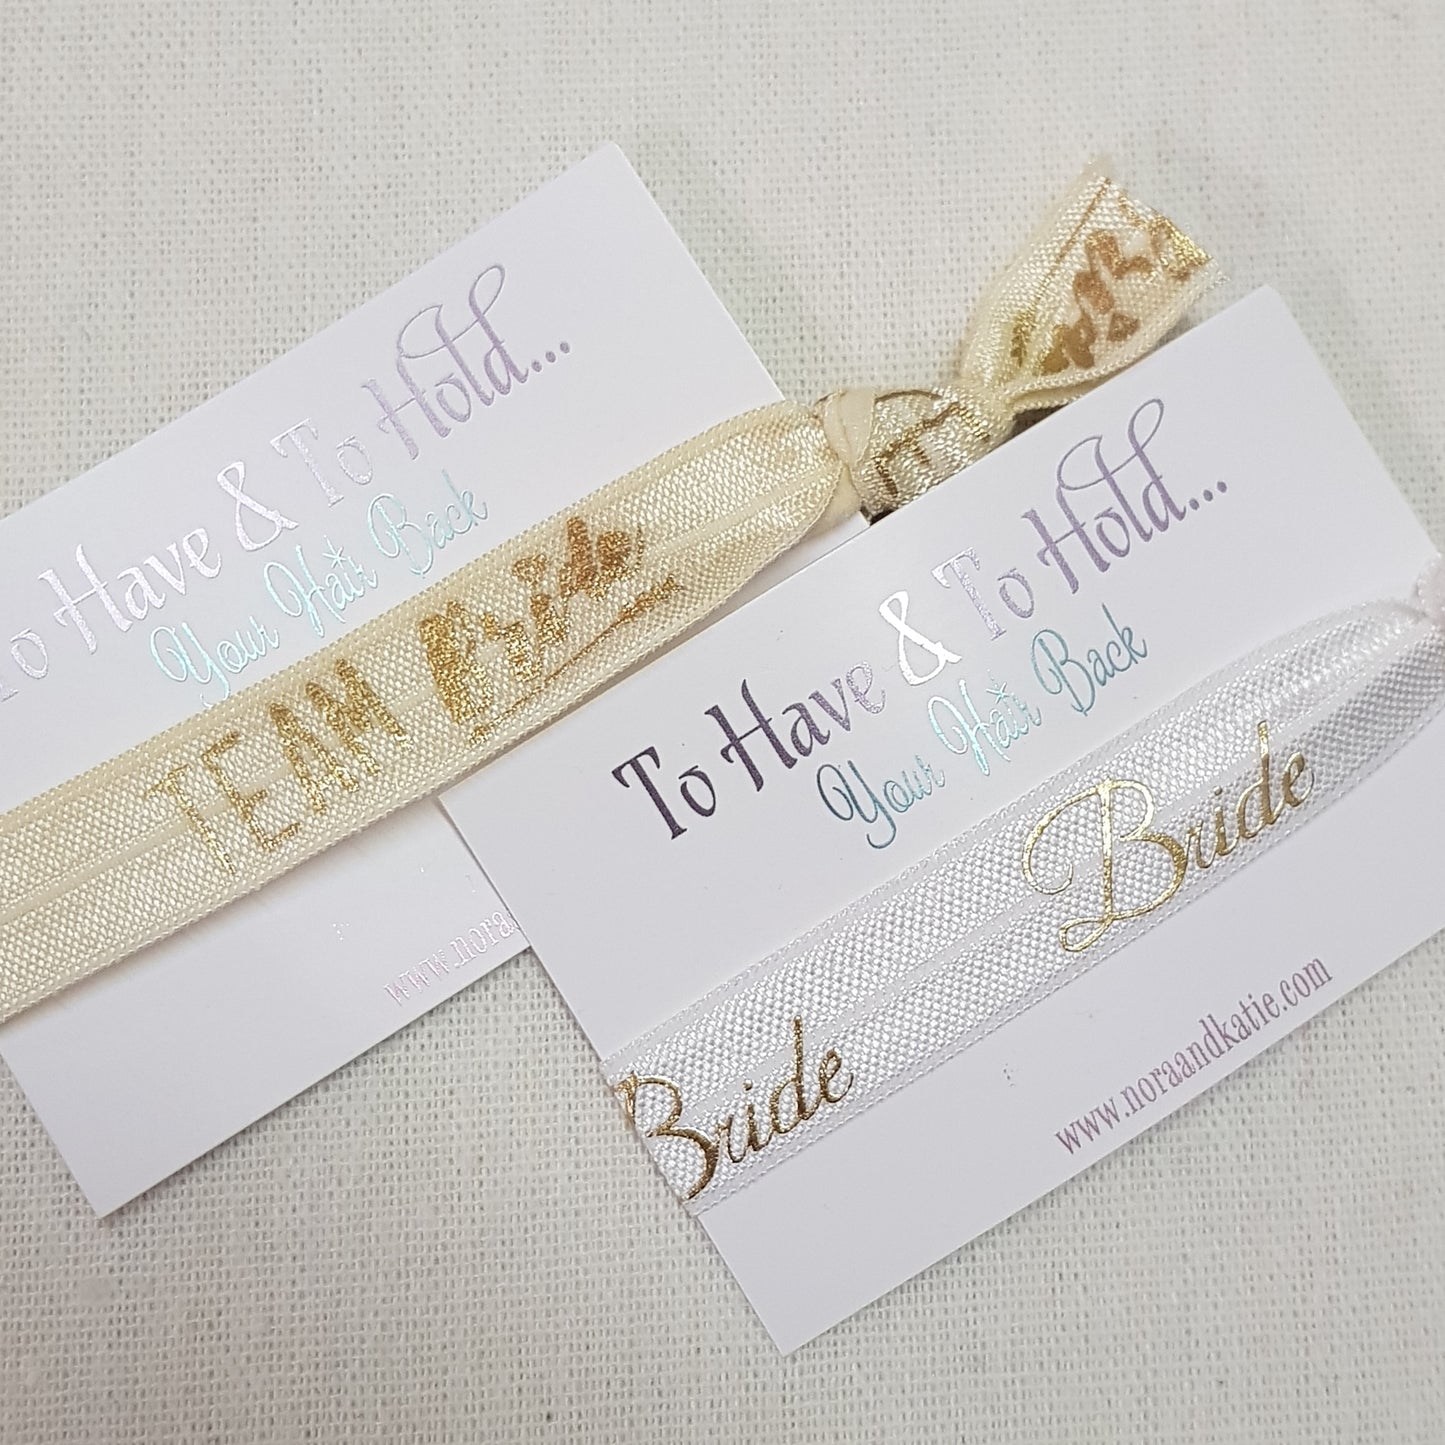 Hen Party bag fillers - To have and to hold hair ties